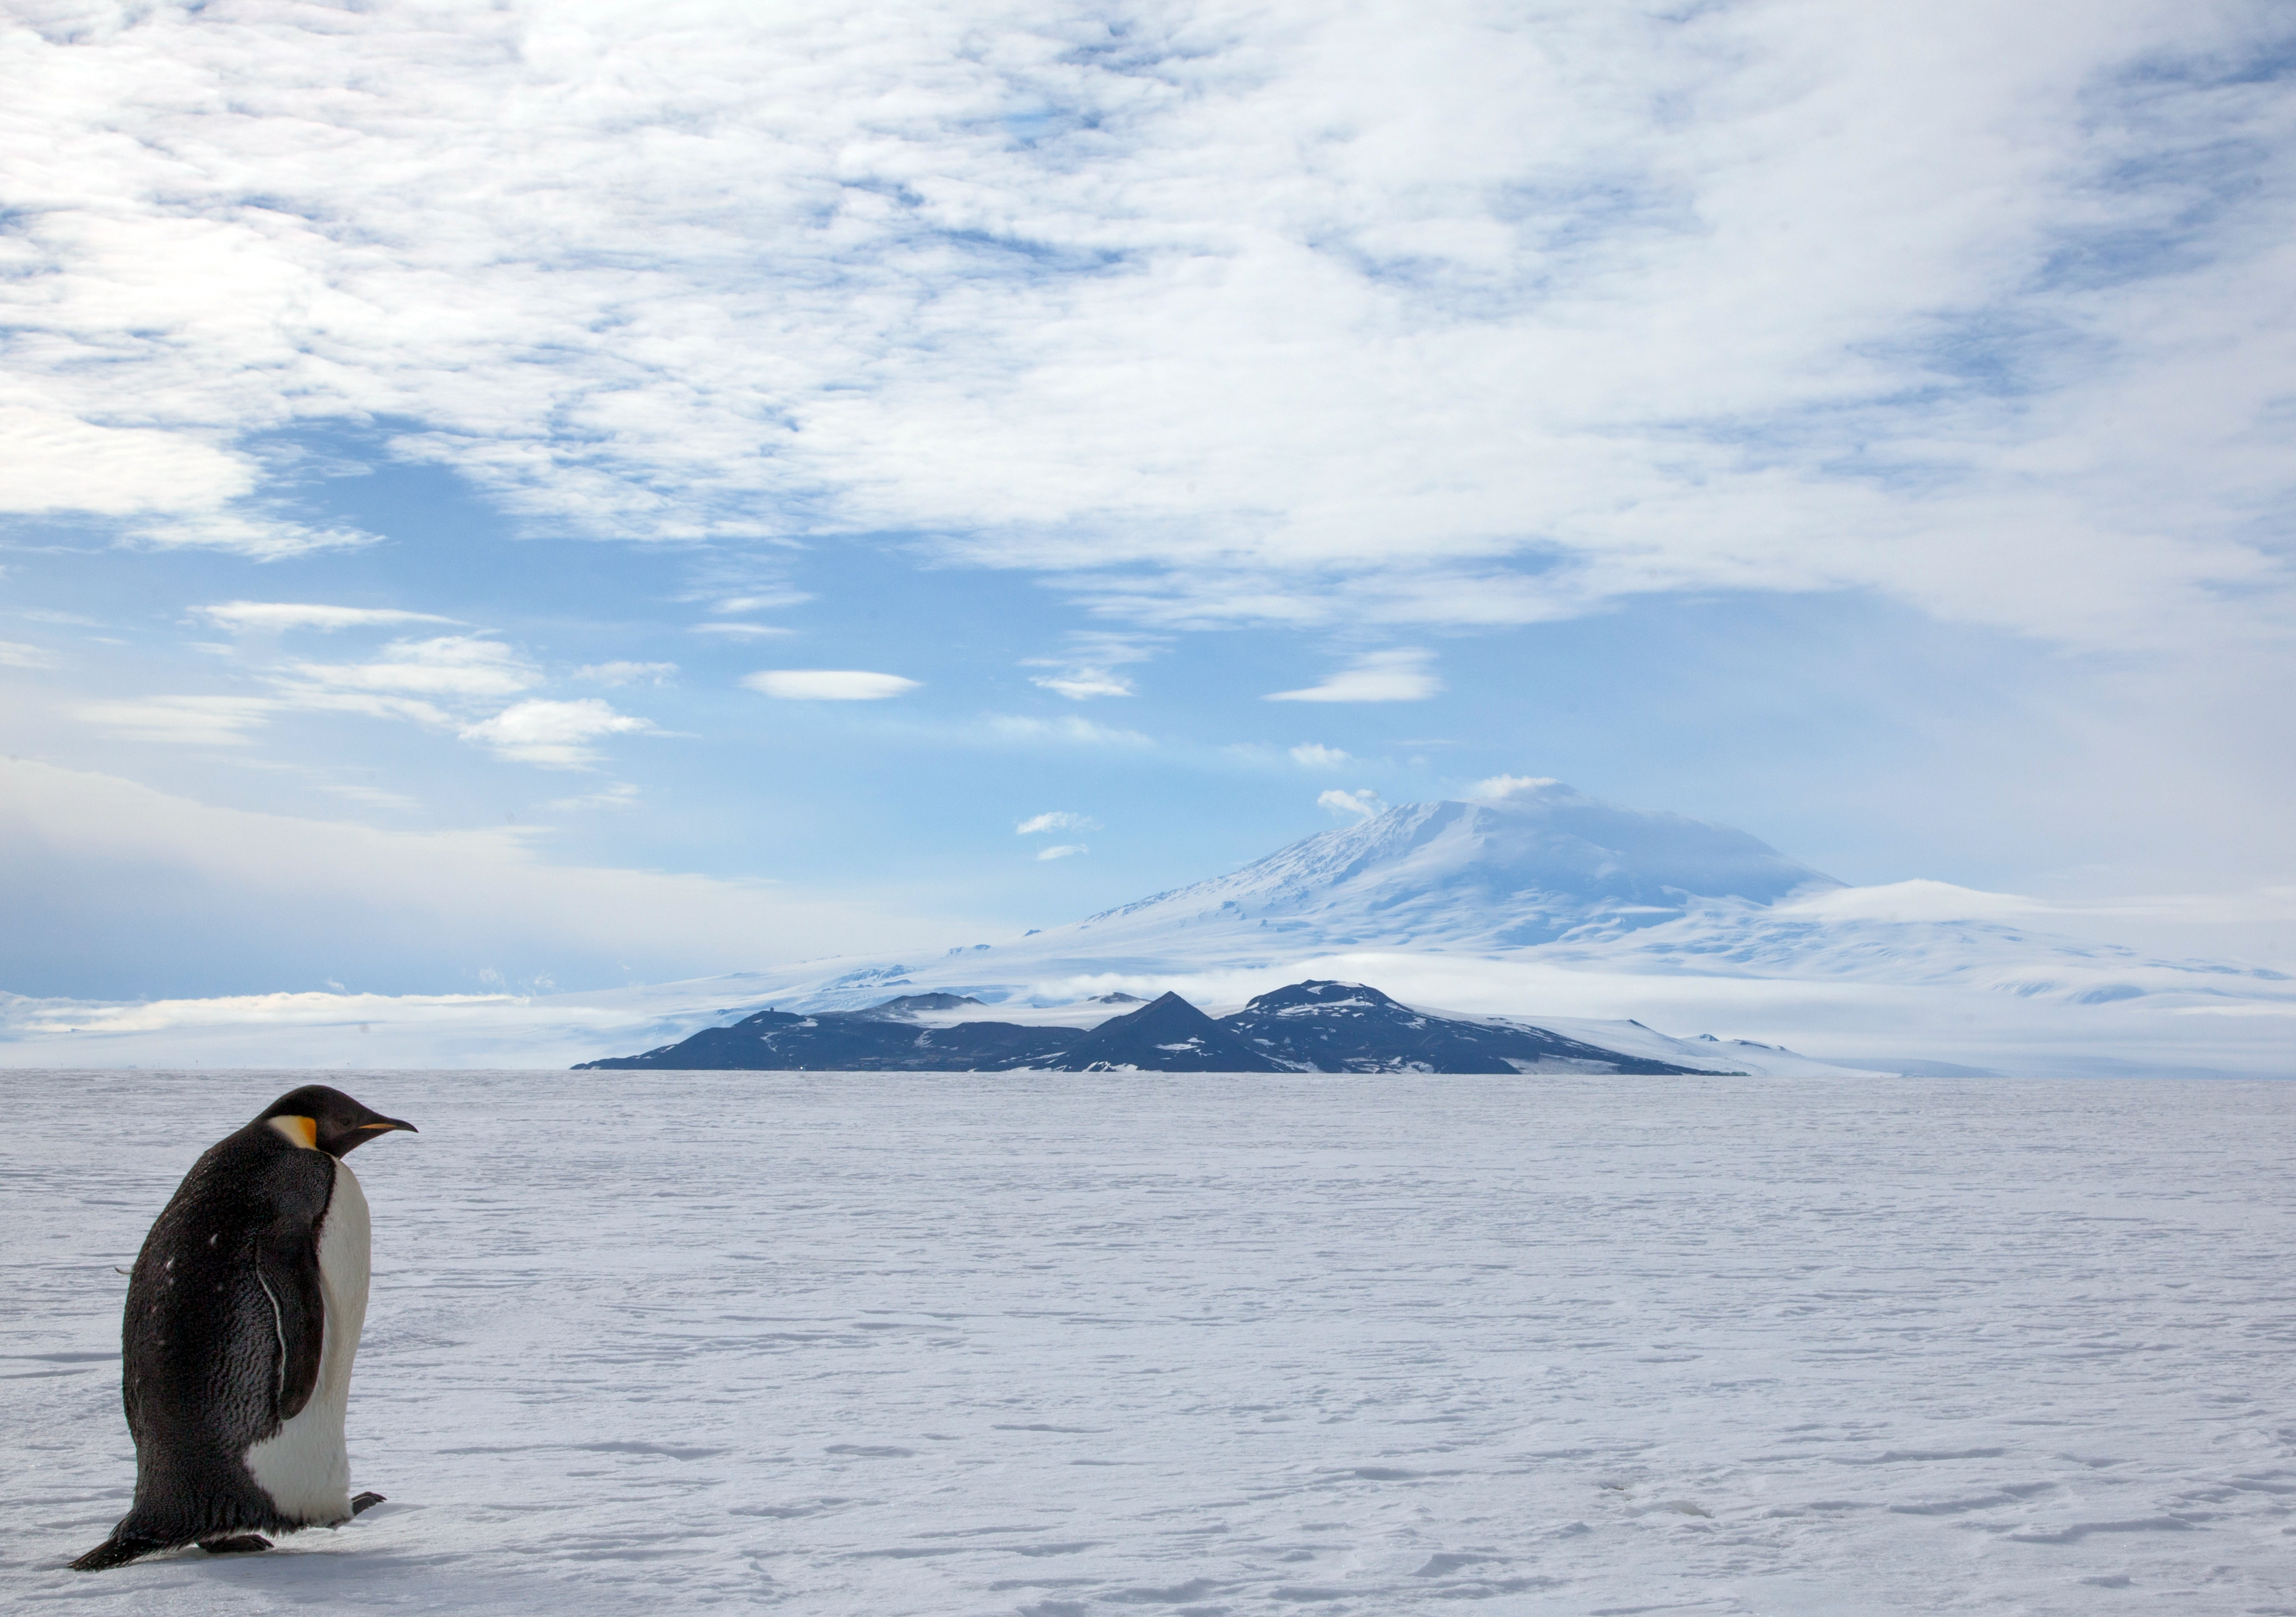 Penguin stands on ice, with island and mountain in distance.